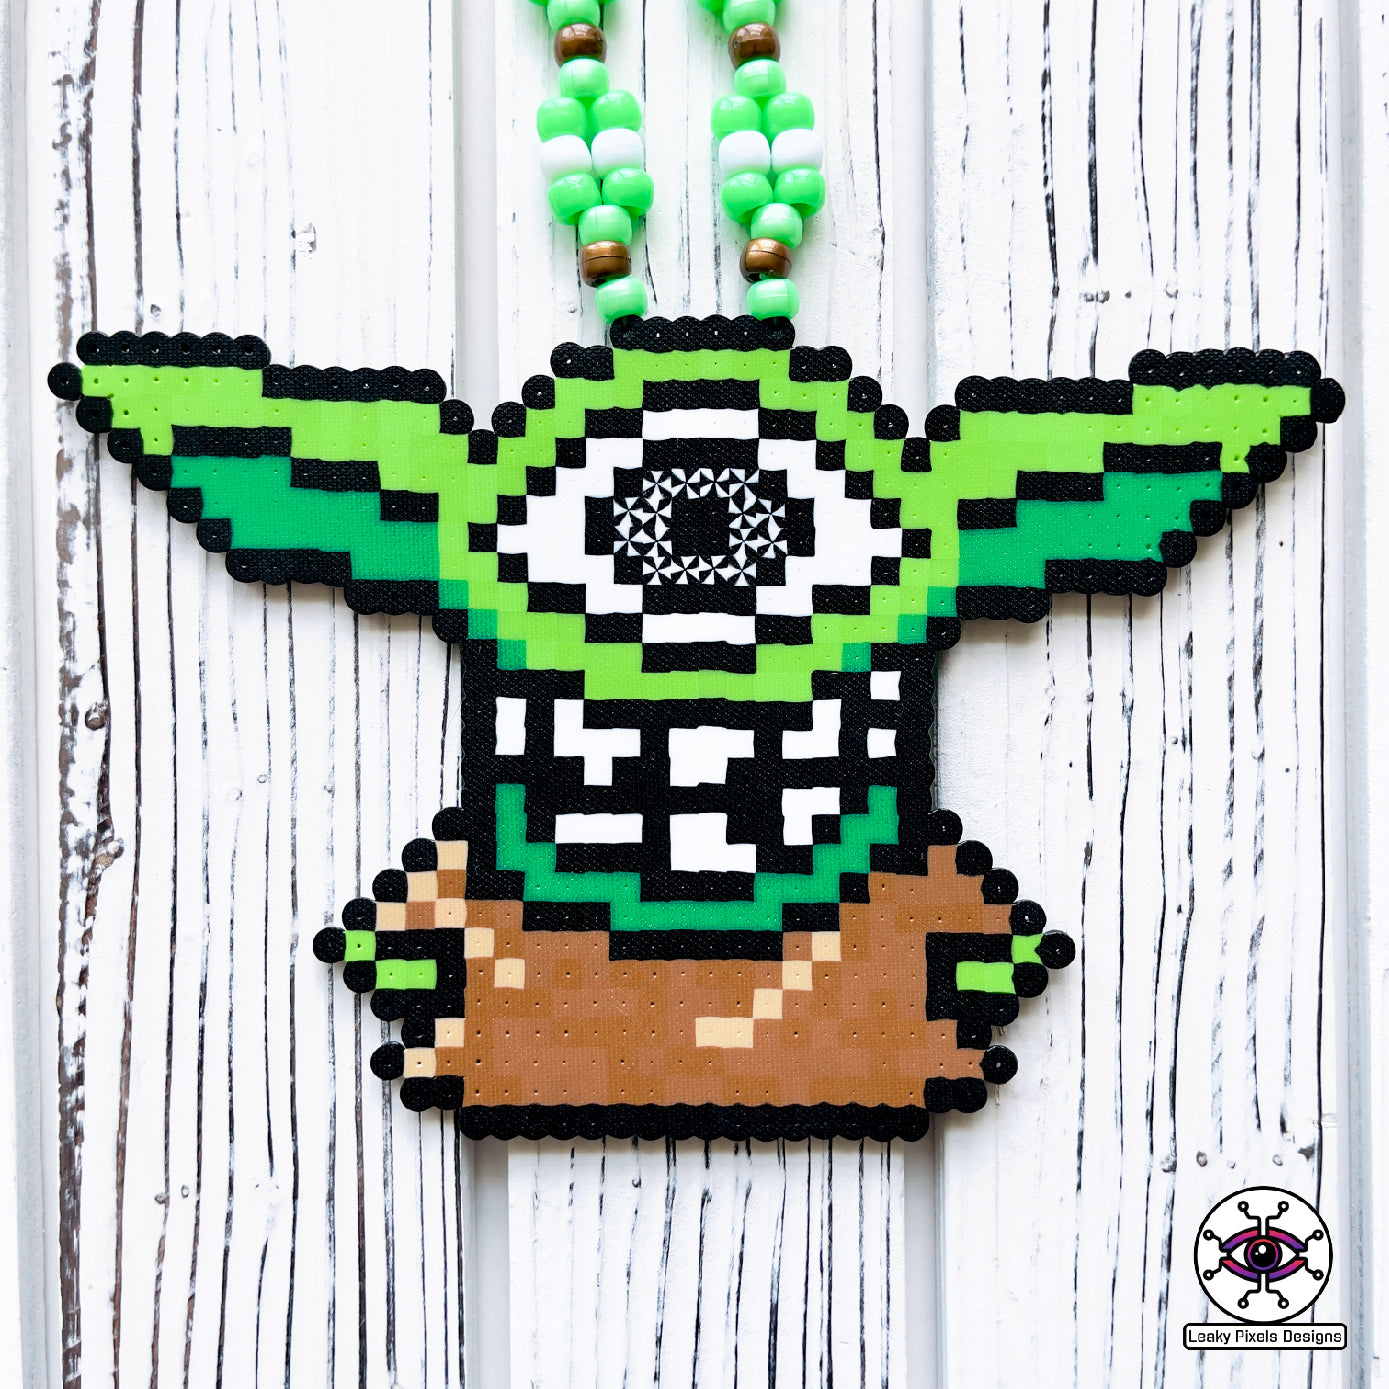 Baby grogu subtronics perler necklace. green yoda with cyclops eye and chaotic teeth. necklace is made with brown, white and green perler beads. He is wearing a brown outfit.